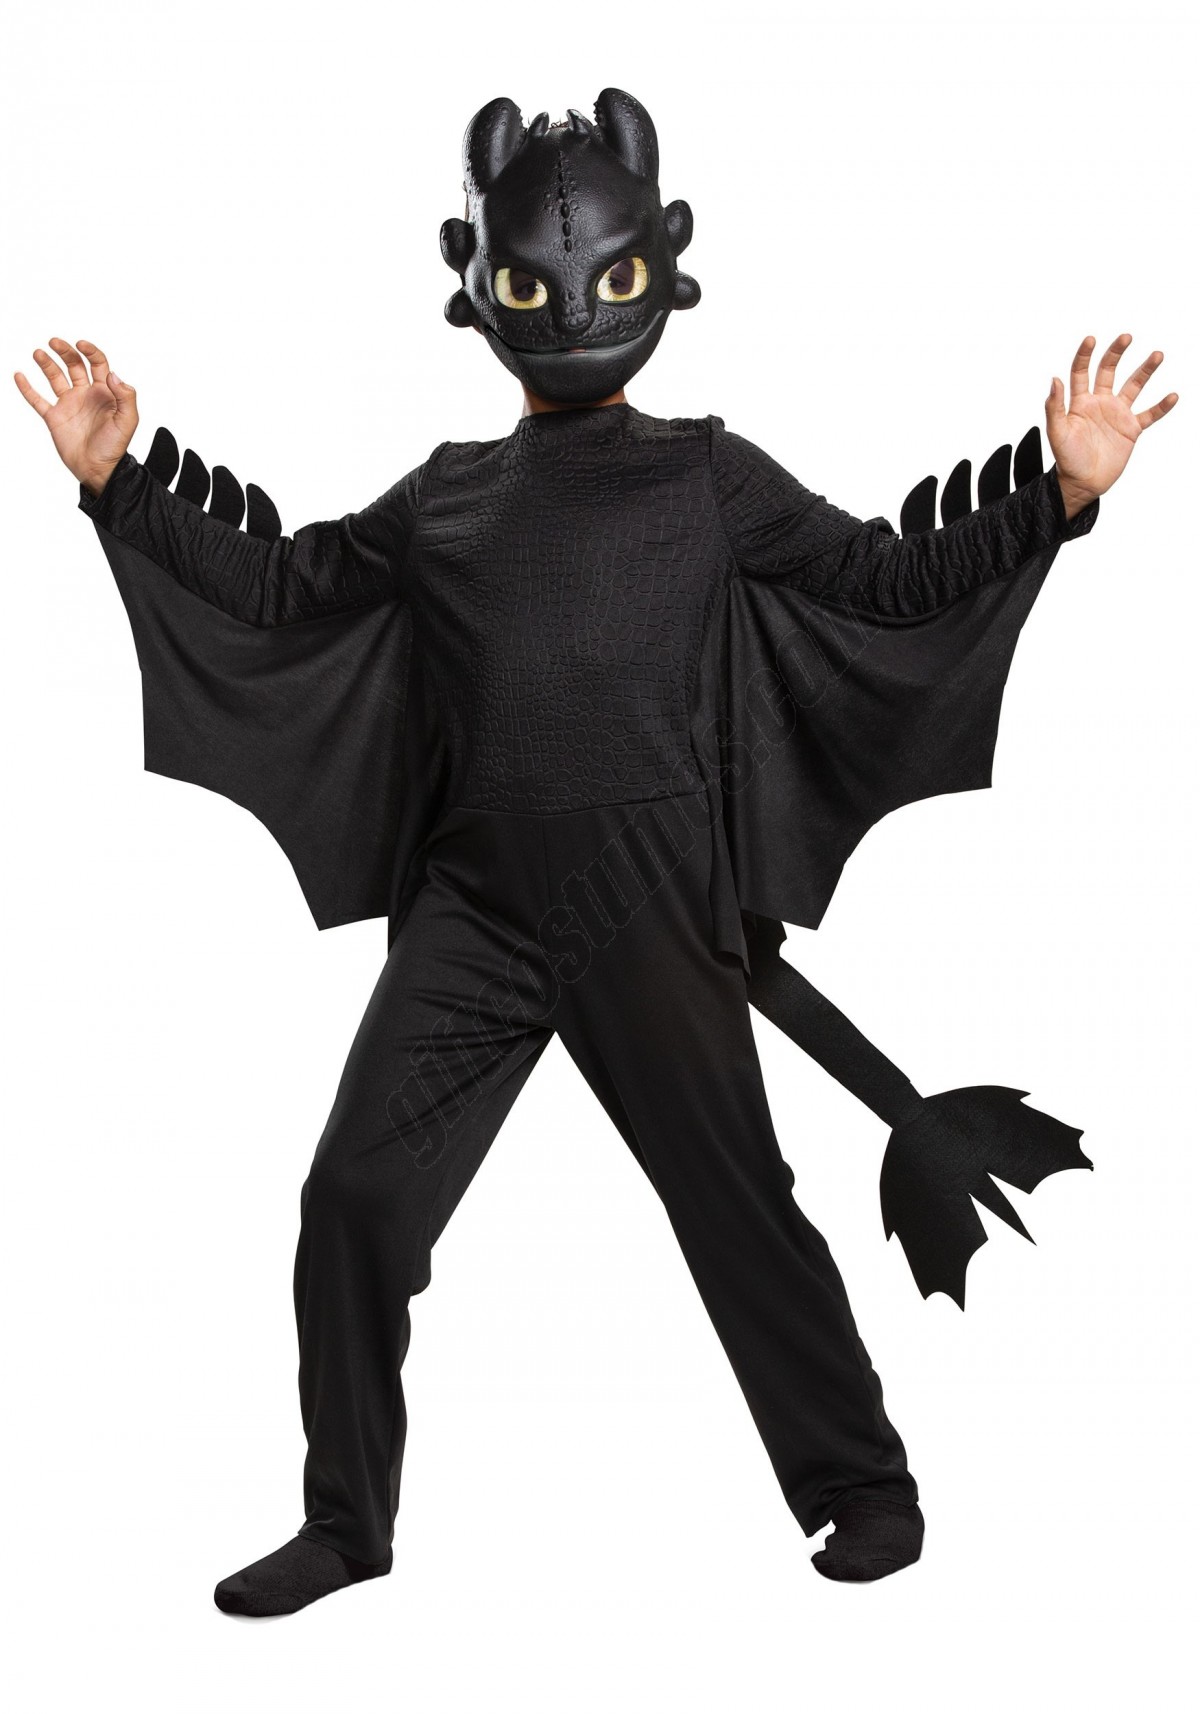 How to Train Your Dragon Kid's Toothless Classic Costume Promotions - -0